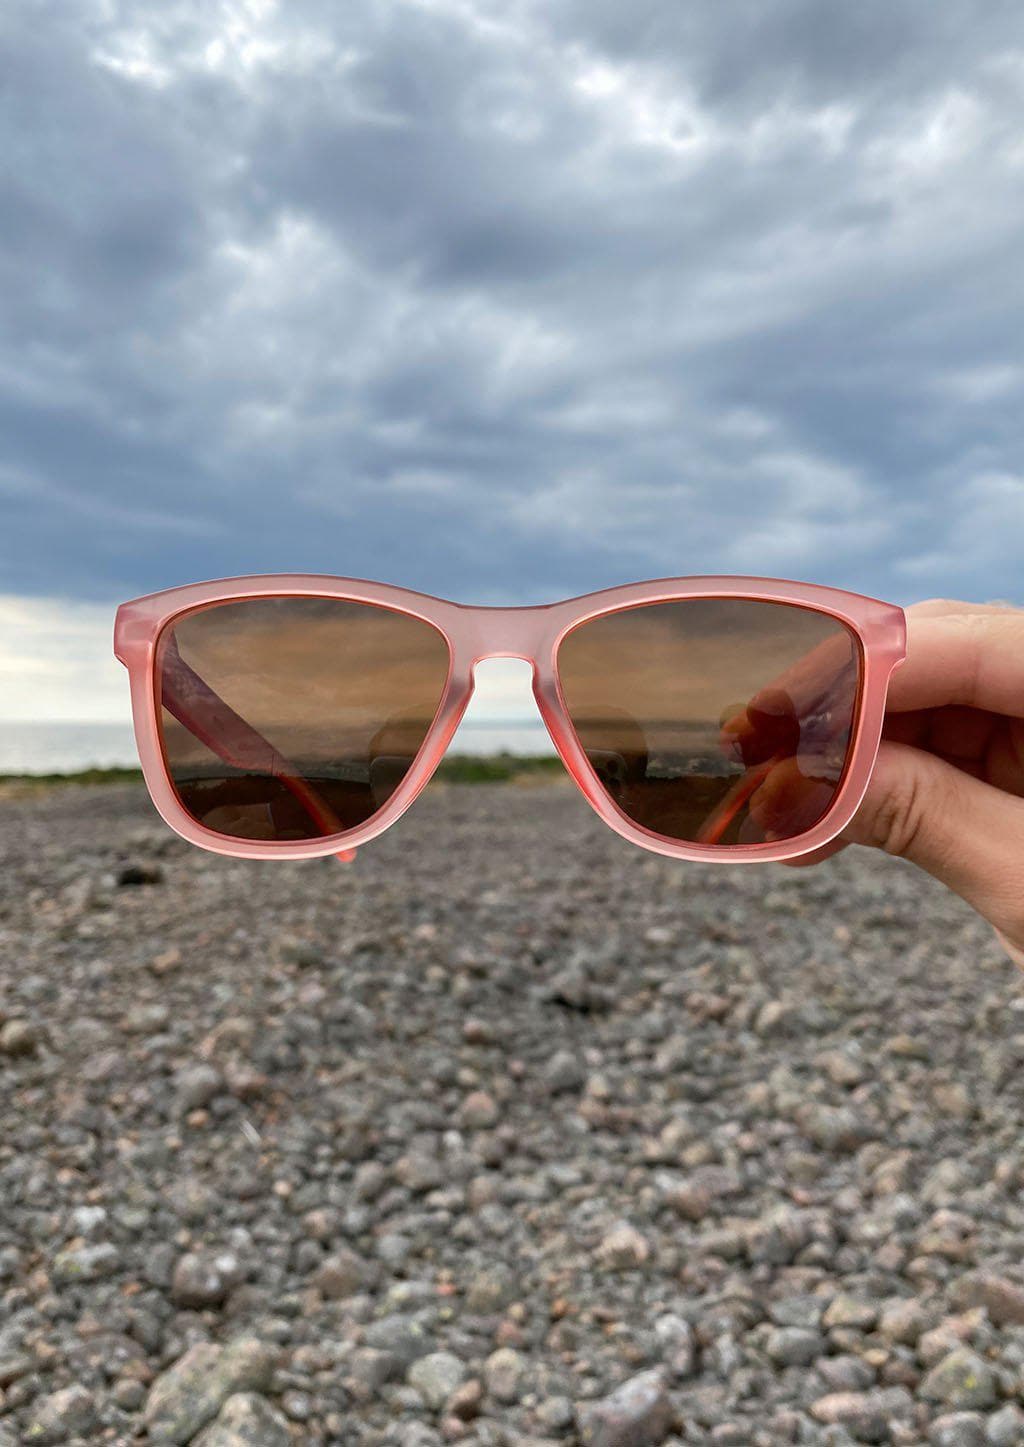 Our Mood V2 is an improved version of our last wayfarers. Plastic body for great quality and durabilty. This is Cherry with red frame and red lenses. From the front outside.